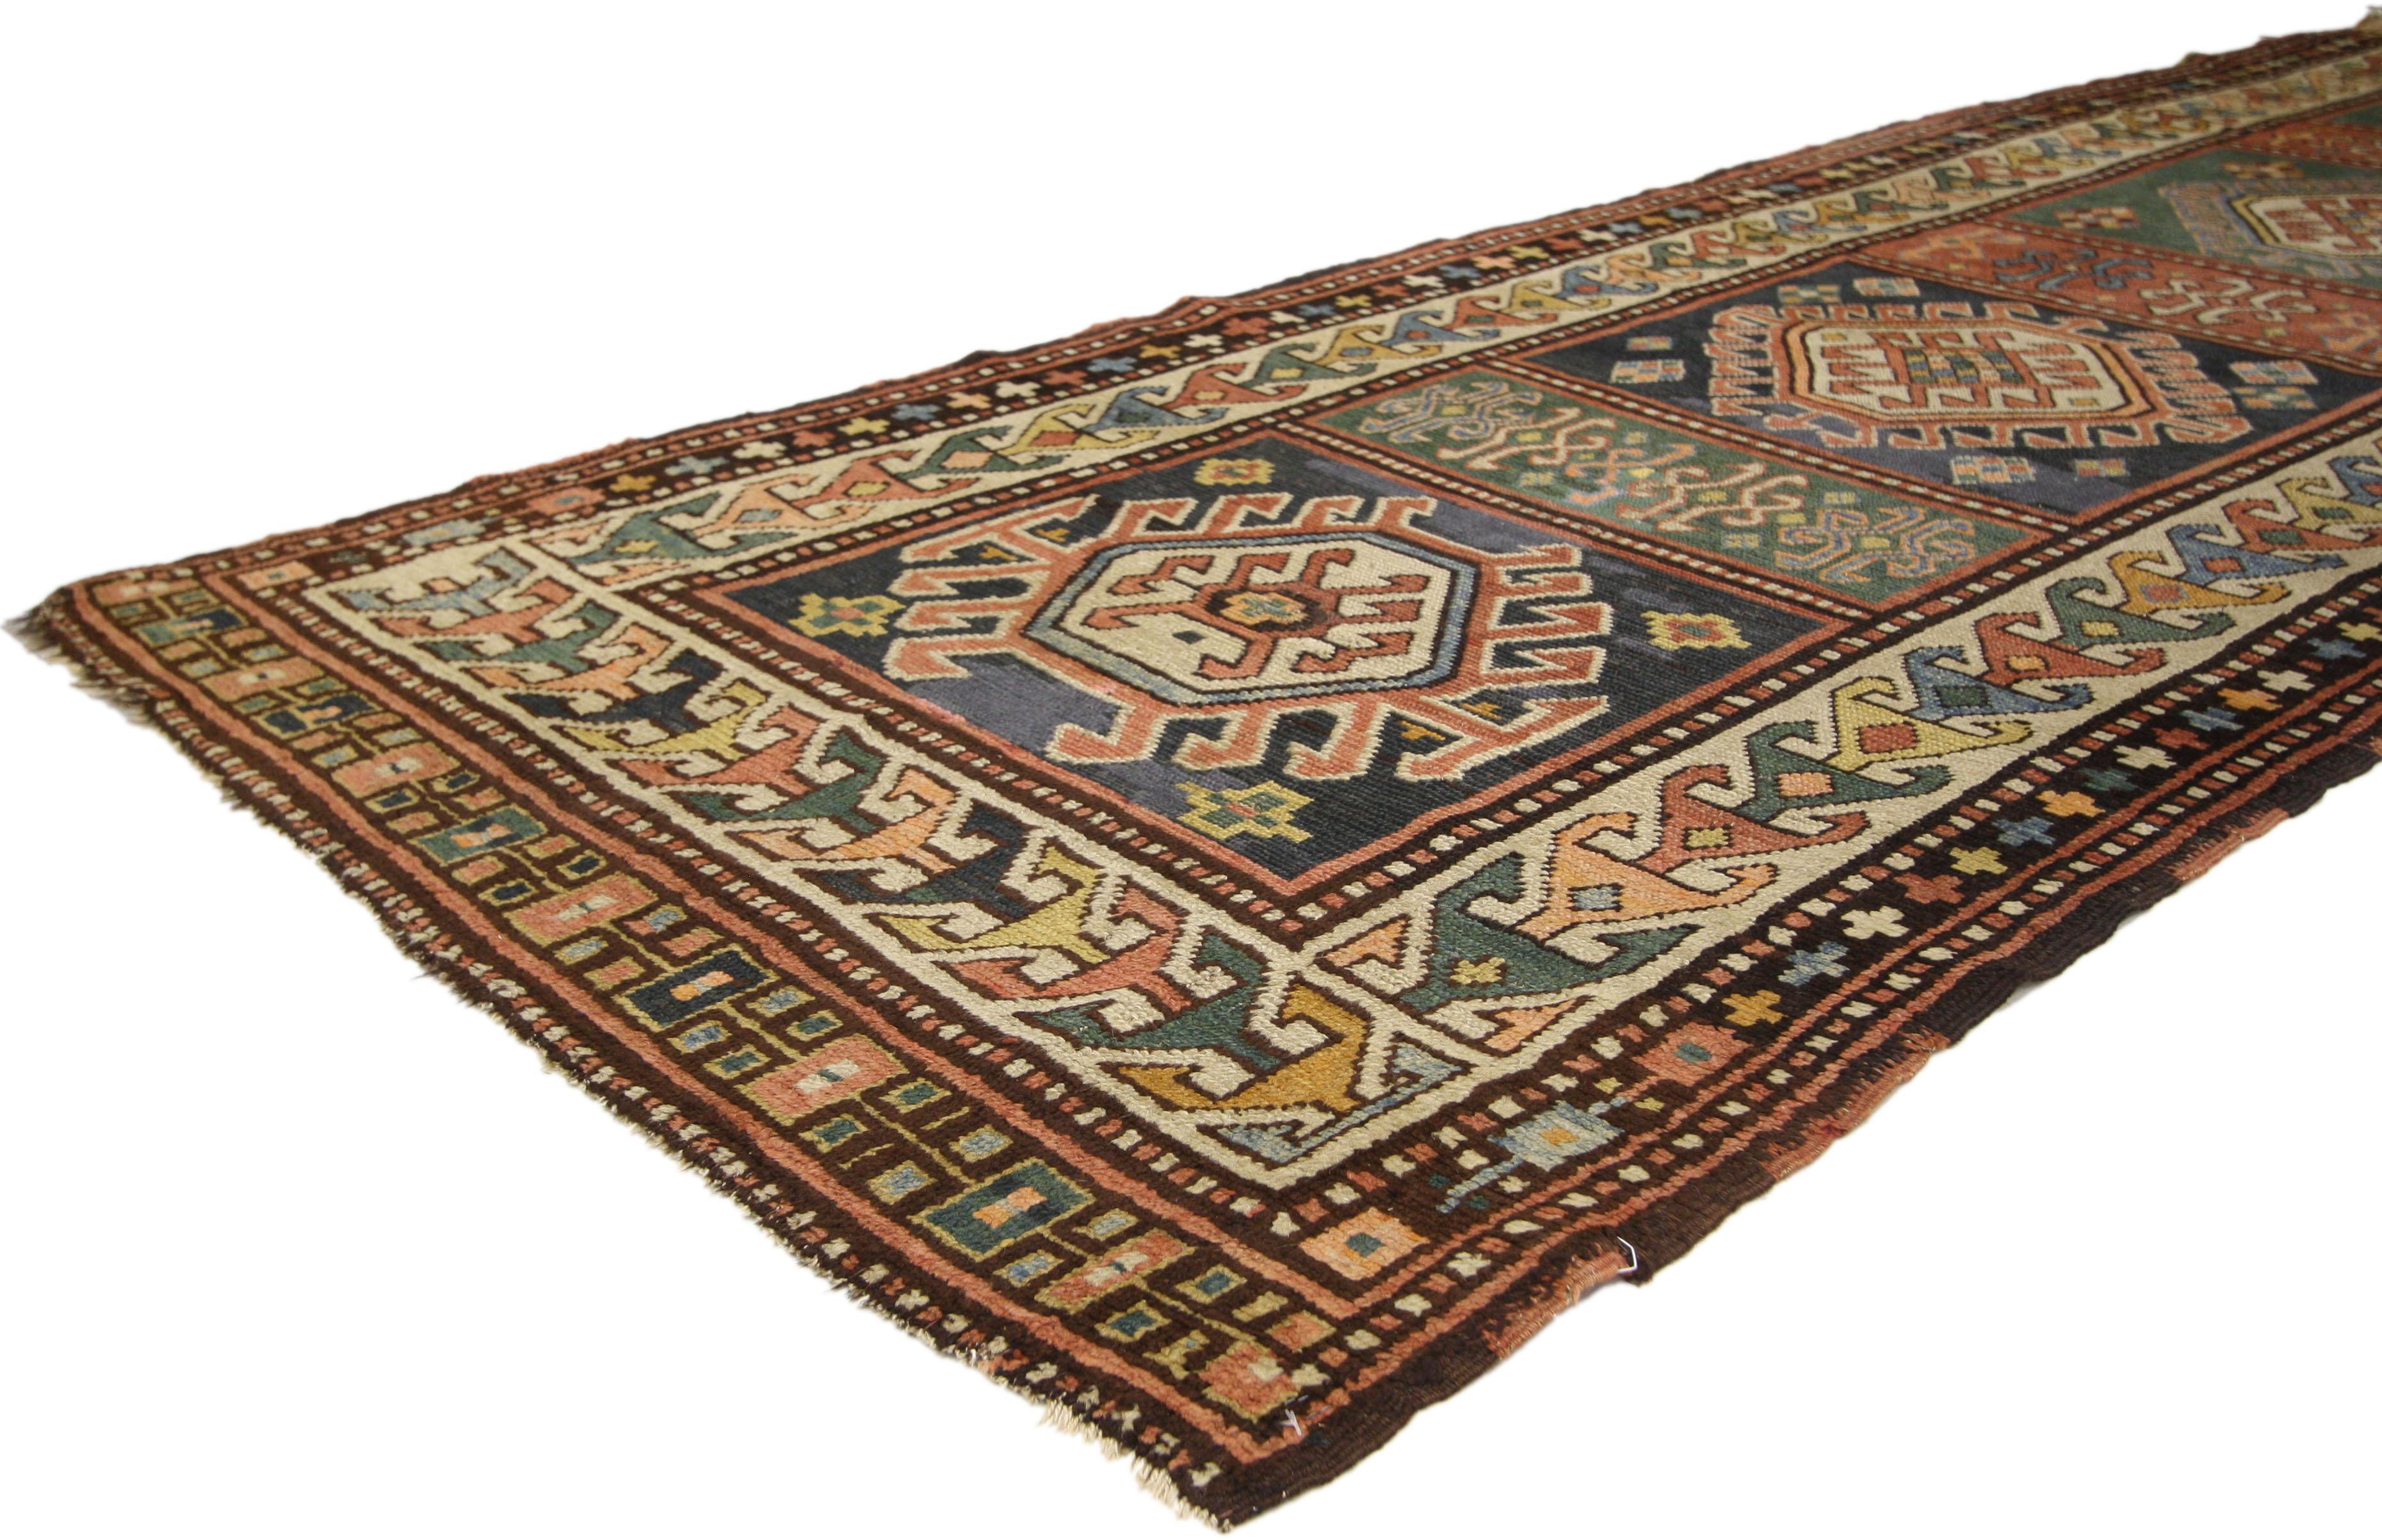 72984 Rustic Tribal Style Antique Caucasian Kazak Rug, Wide Hallway Runner. This hand-knotted wool antique Caucasian Kazak carpet runner with modern tribal style communicates some of the finer and more important points of geometric design elements.